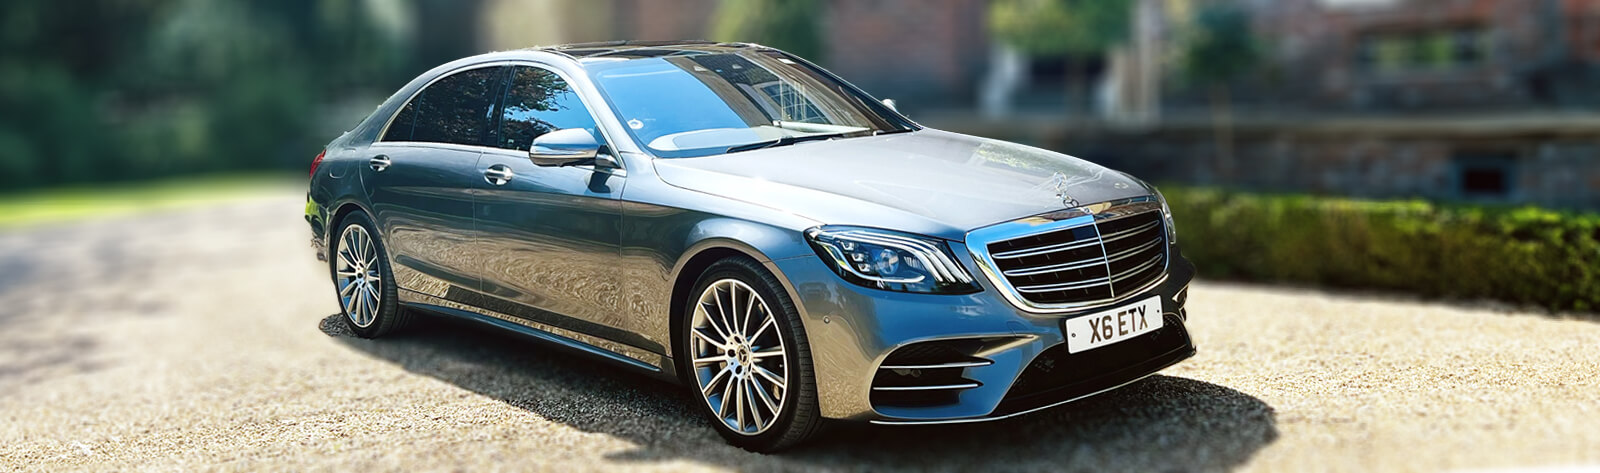 mercedes v class and mercedes s class Wilmslow